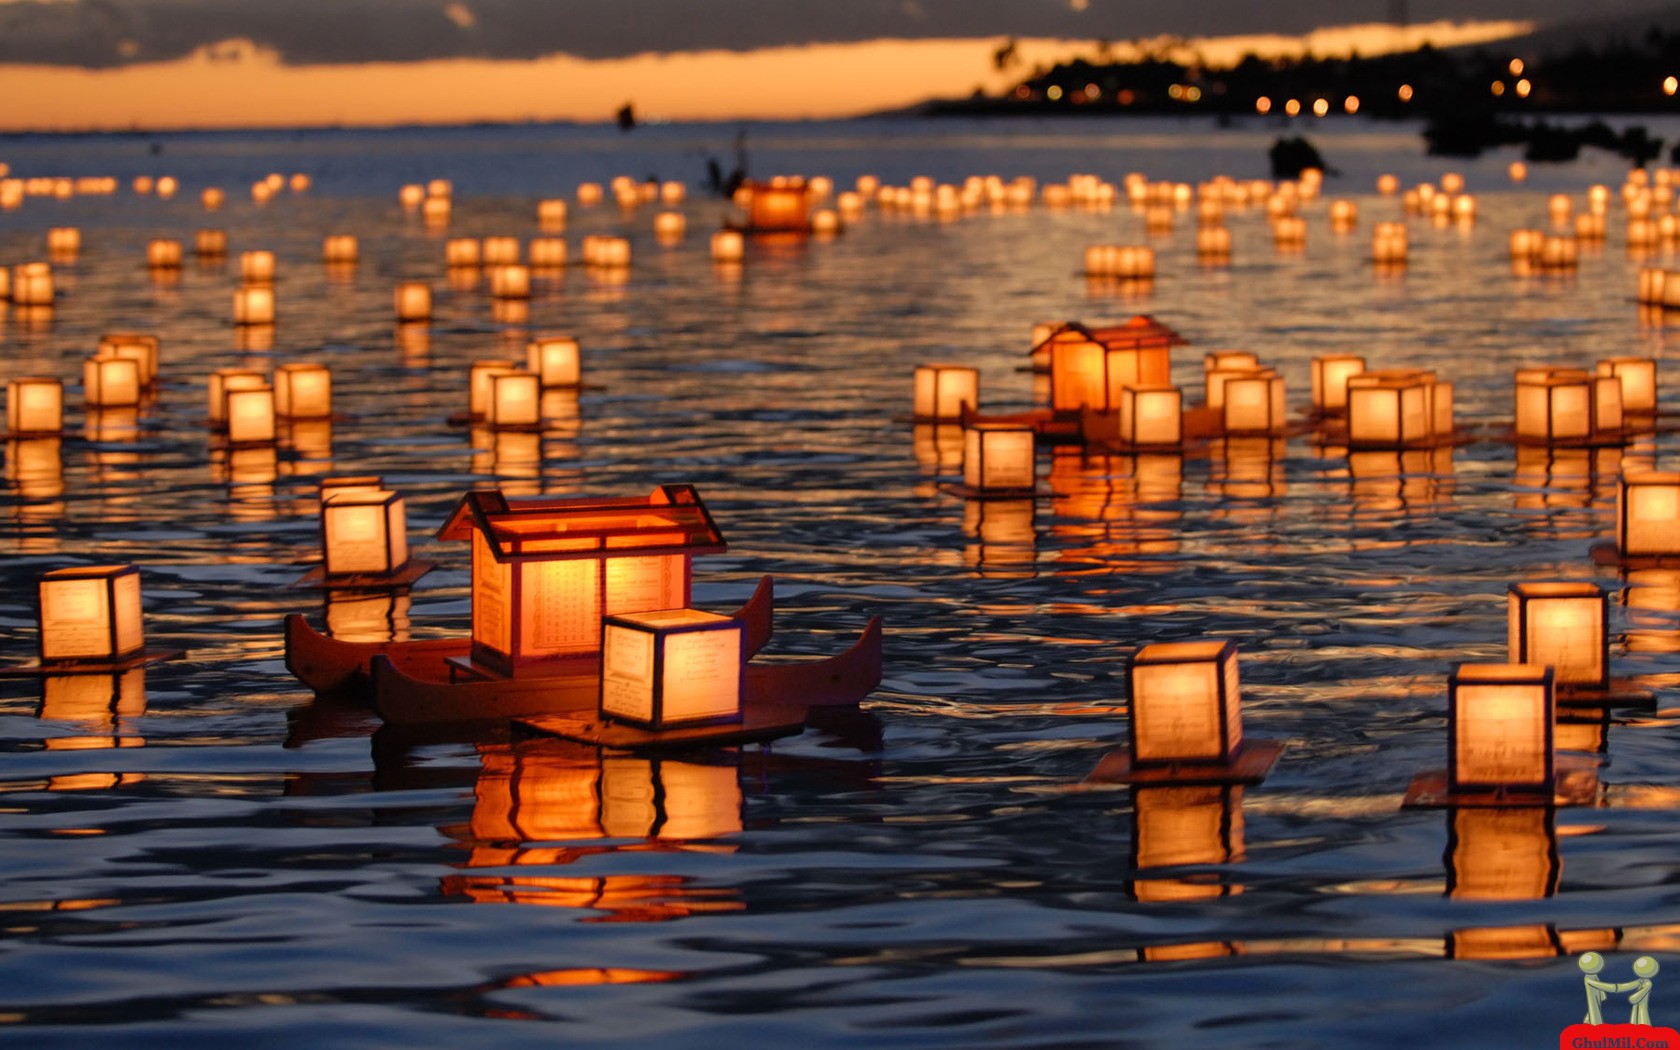 DOWNLOAD AS DESKTOP BACKGROUND: Uploads amazing small beautiful candle ships in water wallpaper jpg - FULL SIZE ...